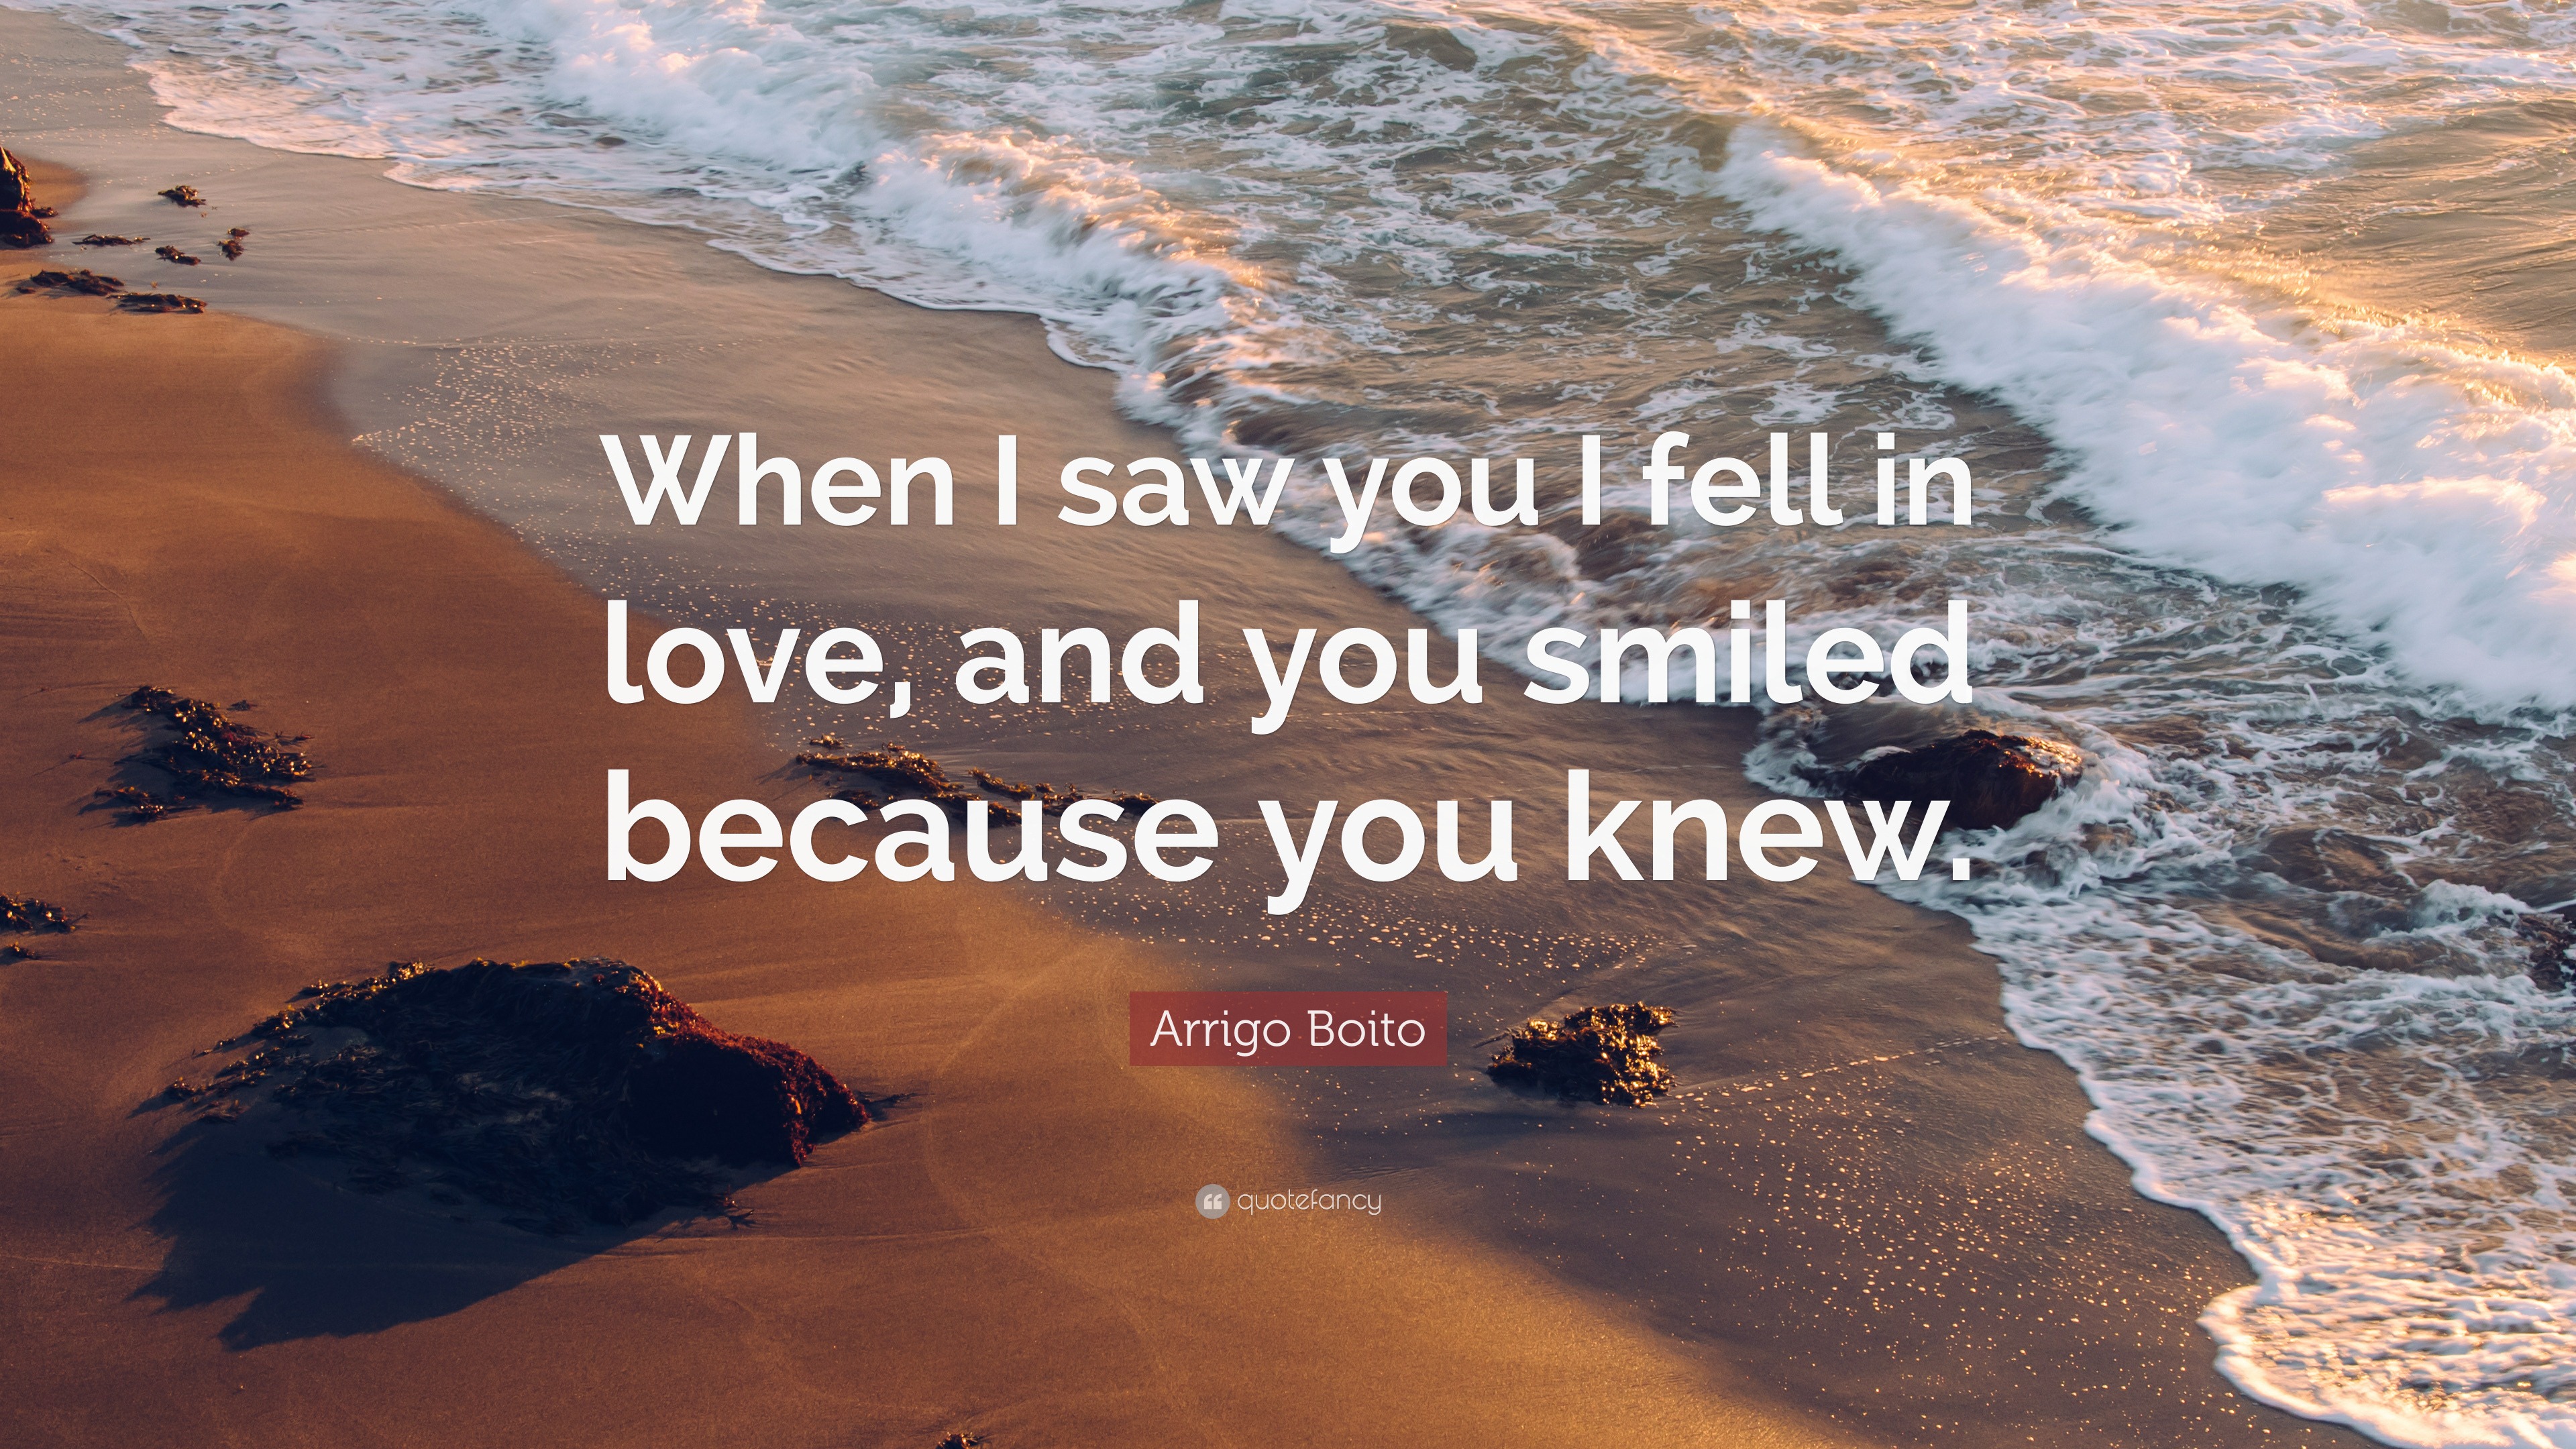 Arrigo Boito Quote: “When I saw you I fell in love, and you smiled ...